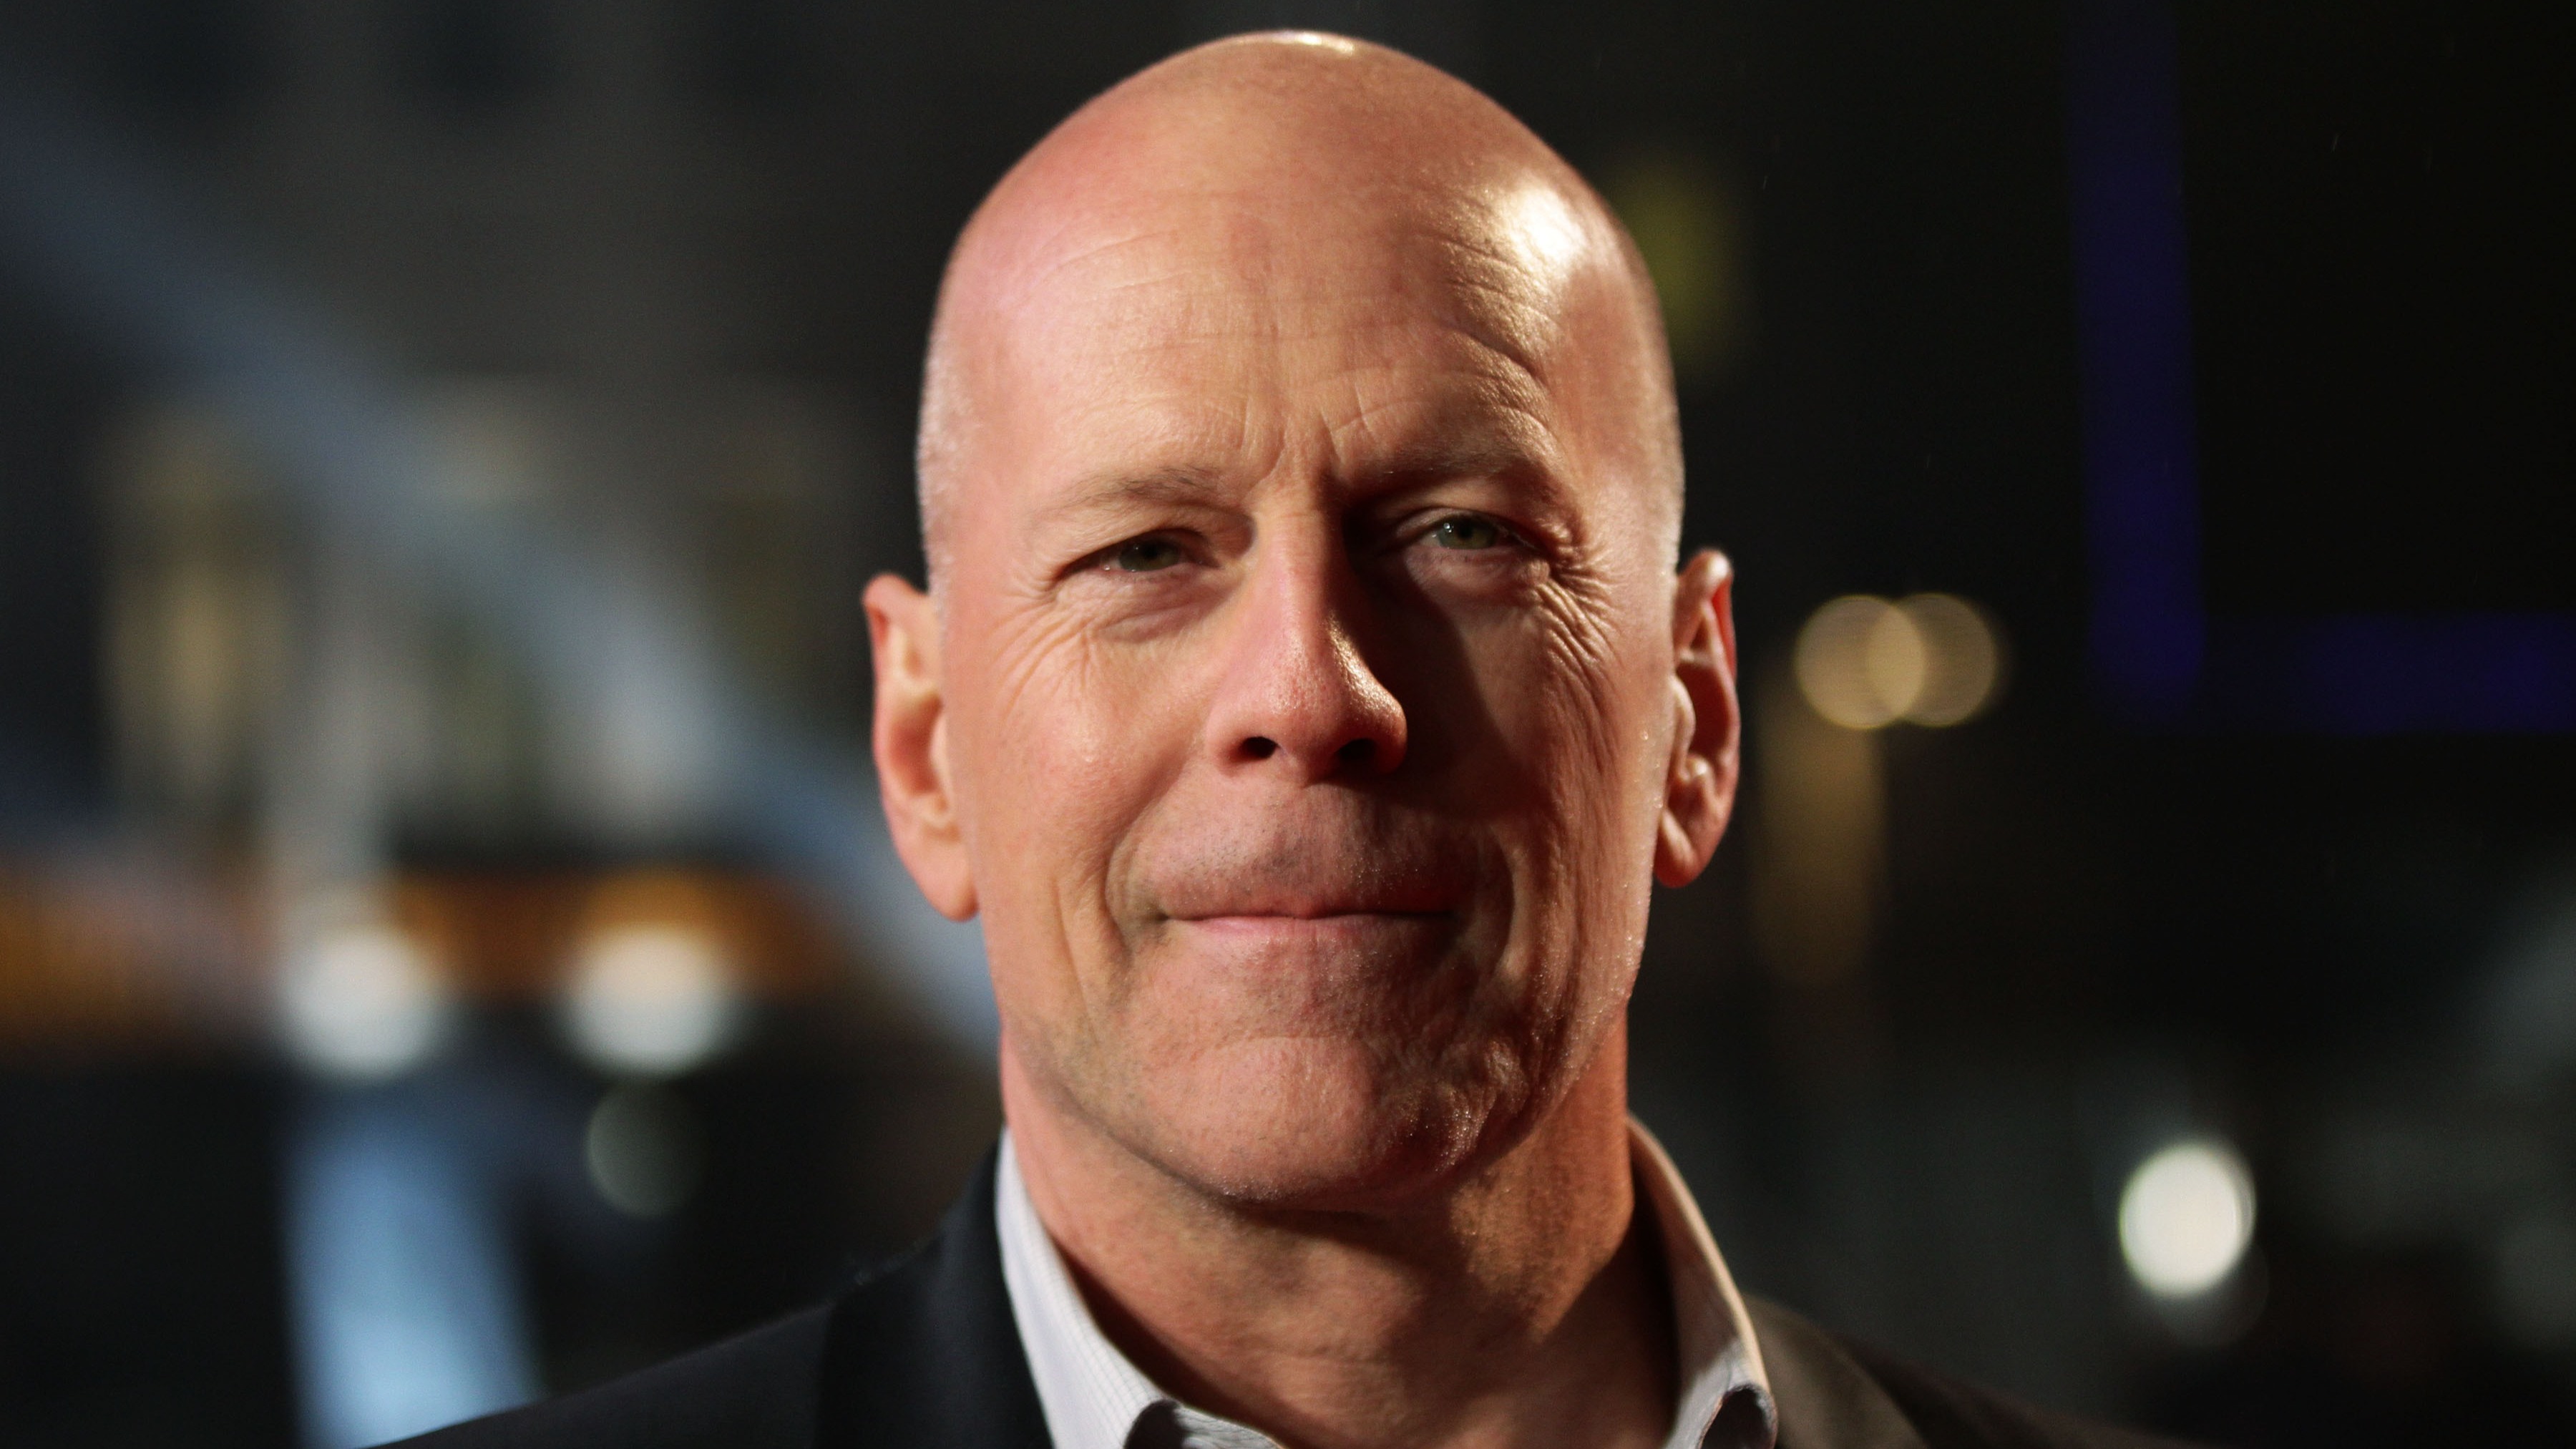 Bruce Willis dementia diagnosis sparks rise in Alzheimer's website visits |  ITV News